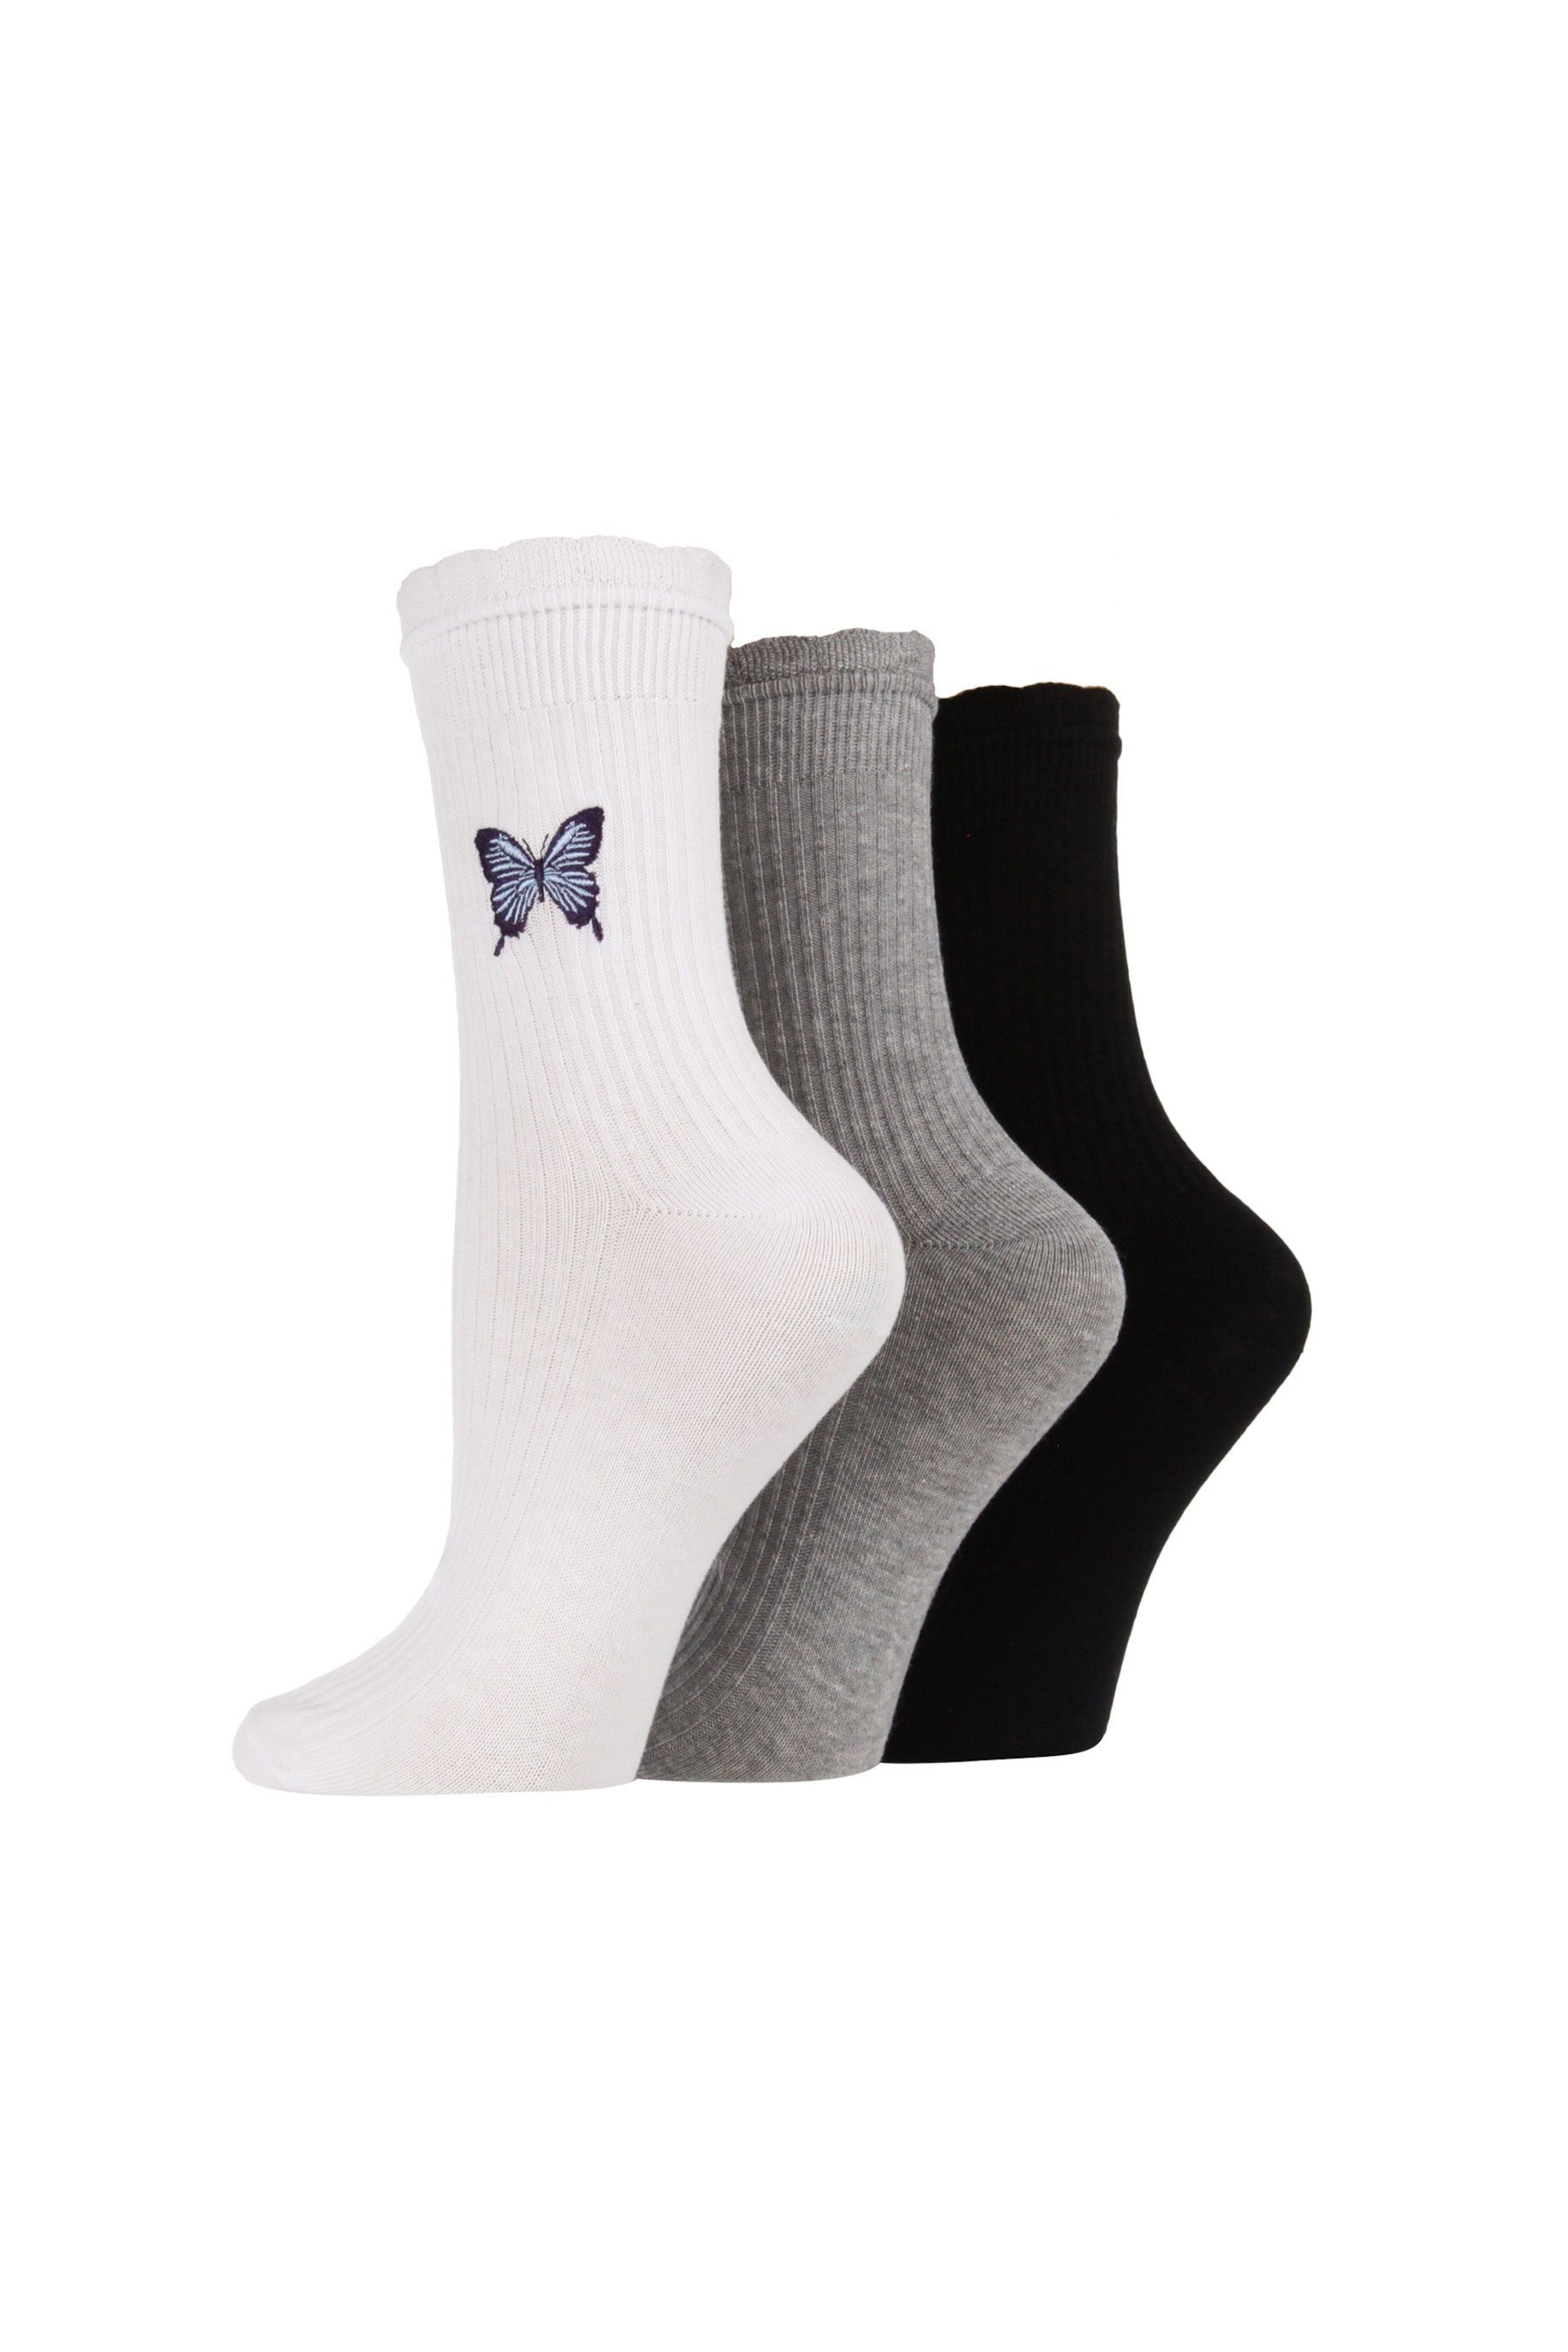 Wild Feet White Butterfly Embroidered Rib Frilly Leisure Socks - Image 2 of 4